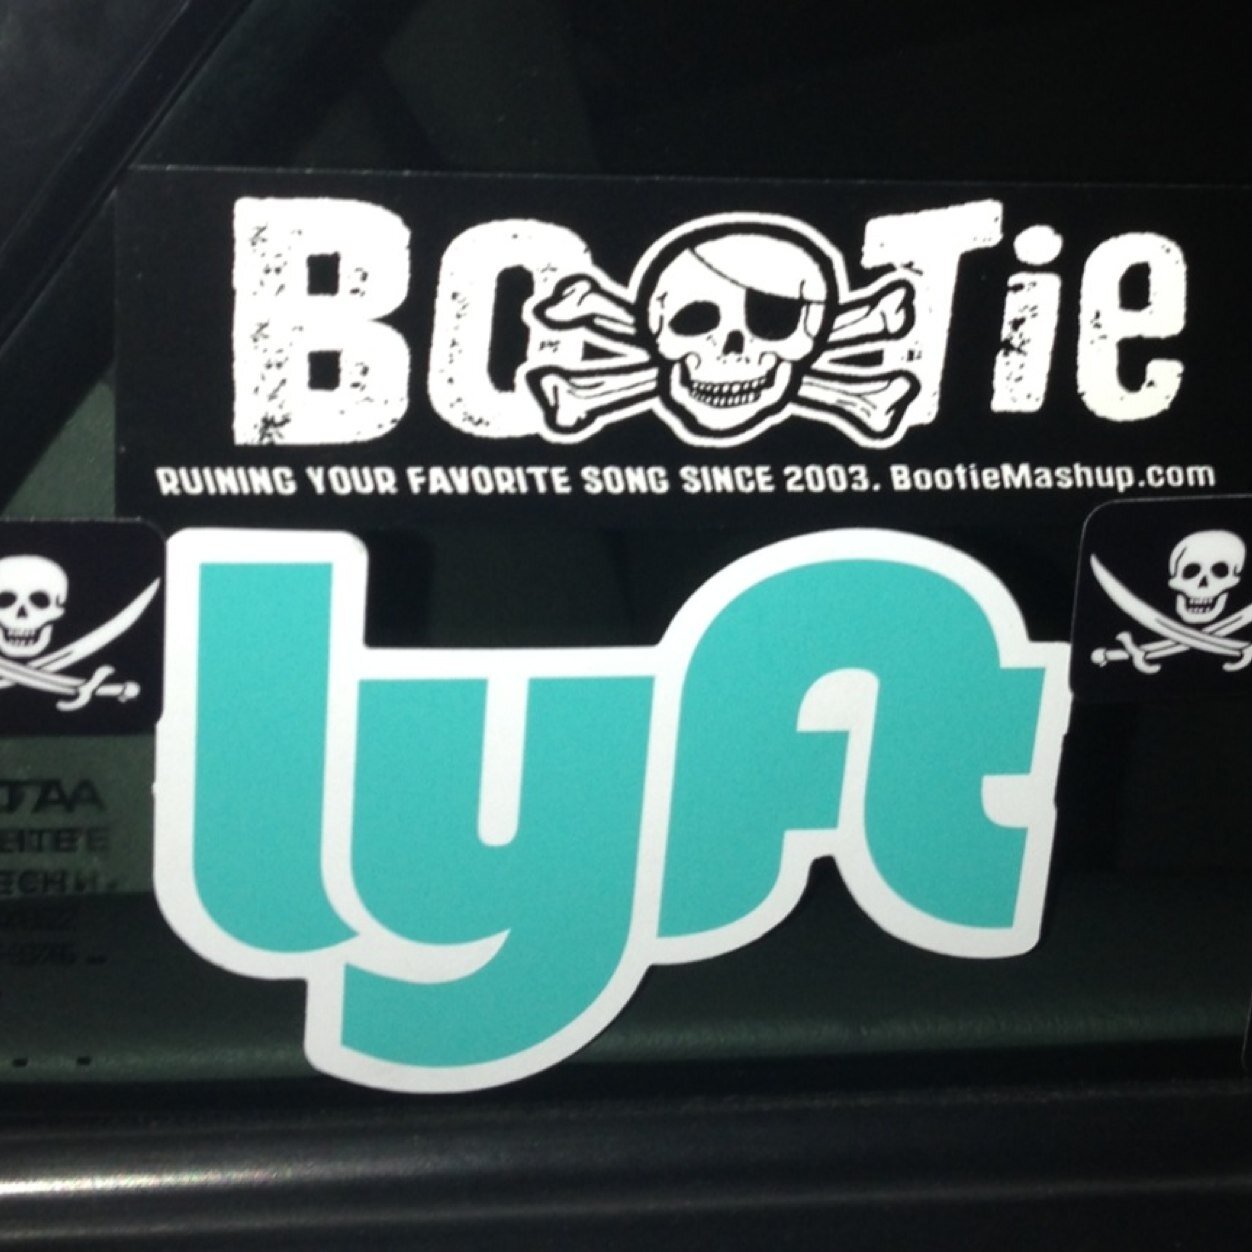 Yo-ho-ho! Welcome aboard Pirate Bootie Lyft. Where it's all about peace, love, bootie (mashups), pirates &pink mustaches. ARRRRGGGHH! $25 credit code KAL19